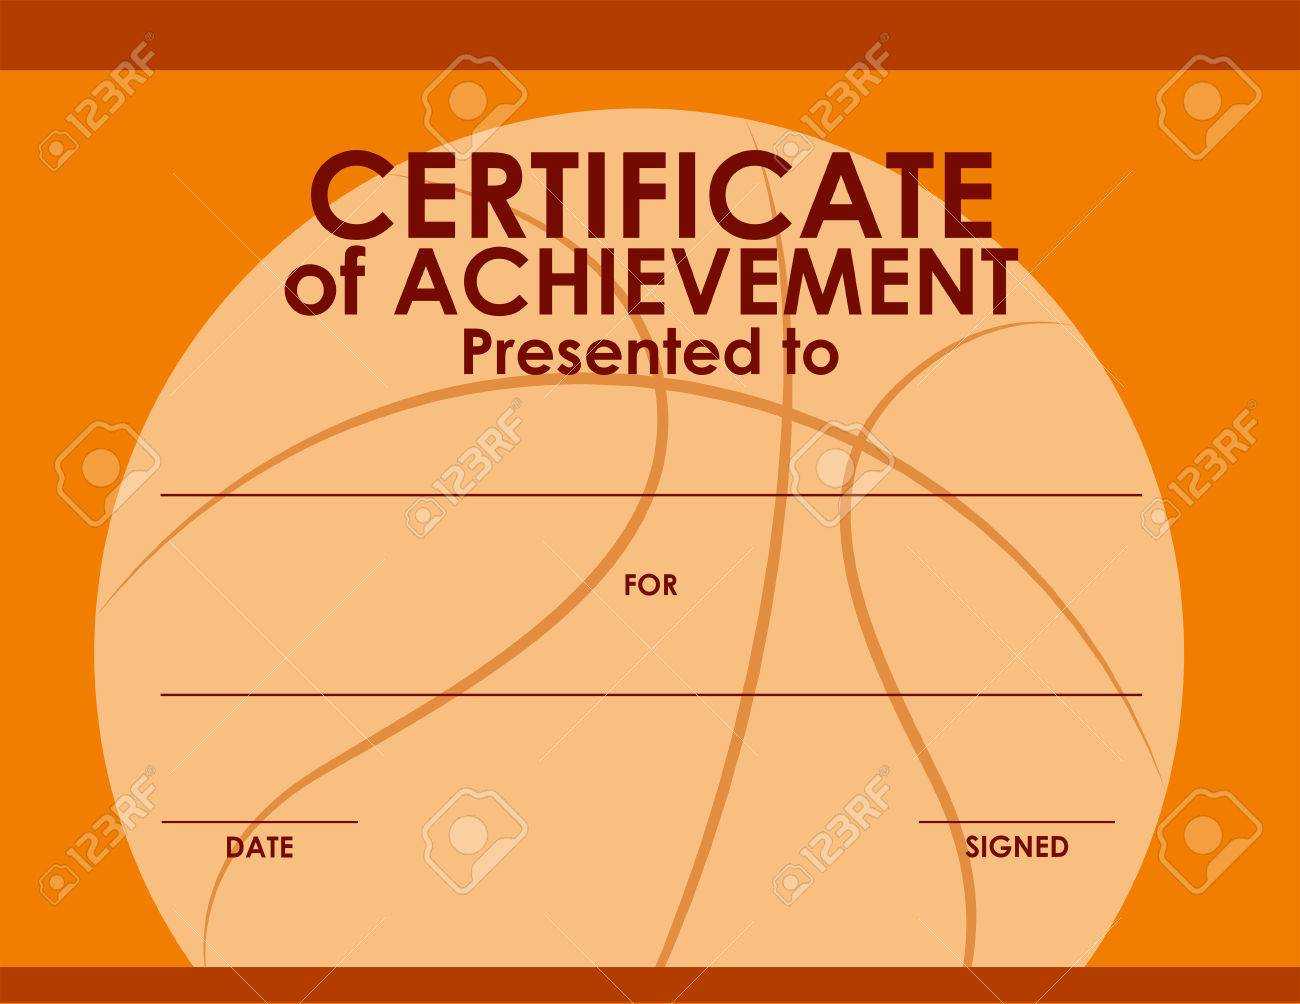 Certificate Template With Basketball Background Illustration Pertaining To Basketball Certificate Template